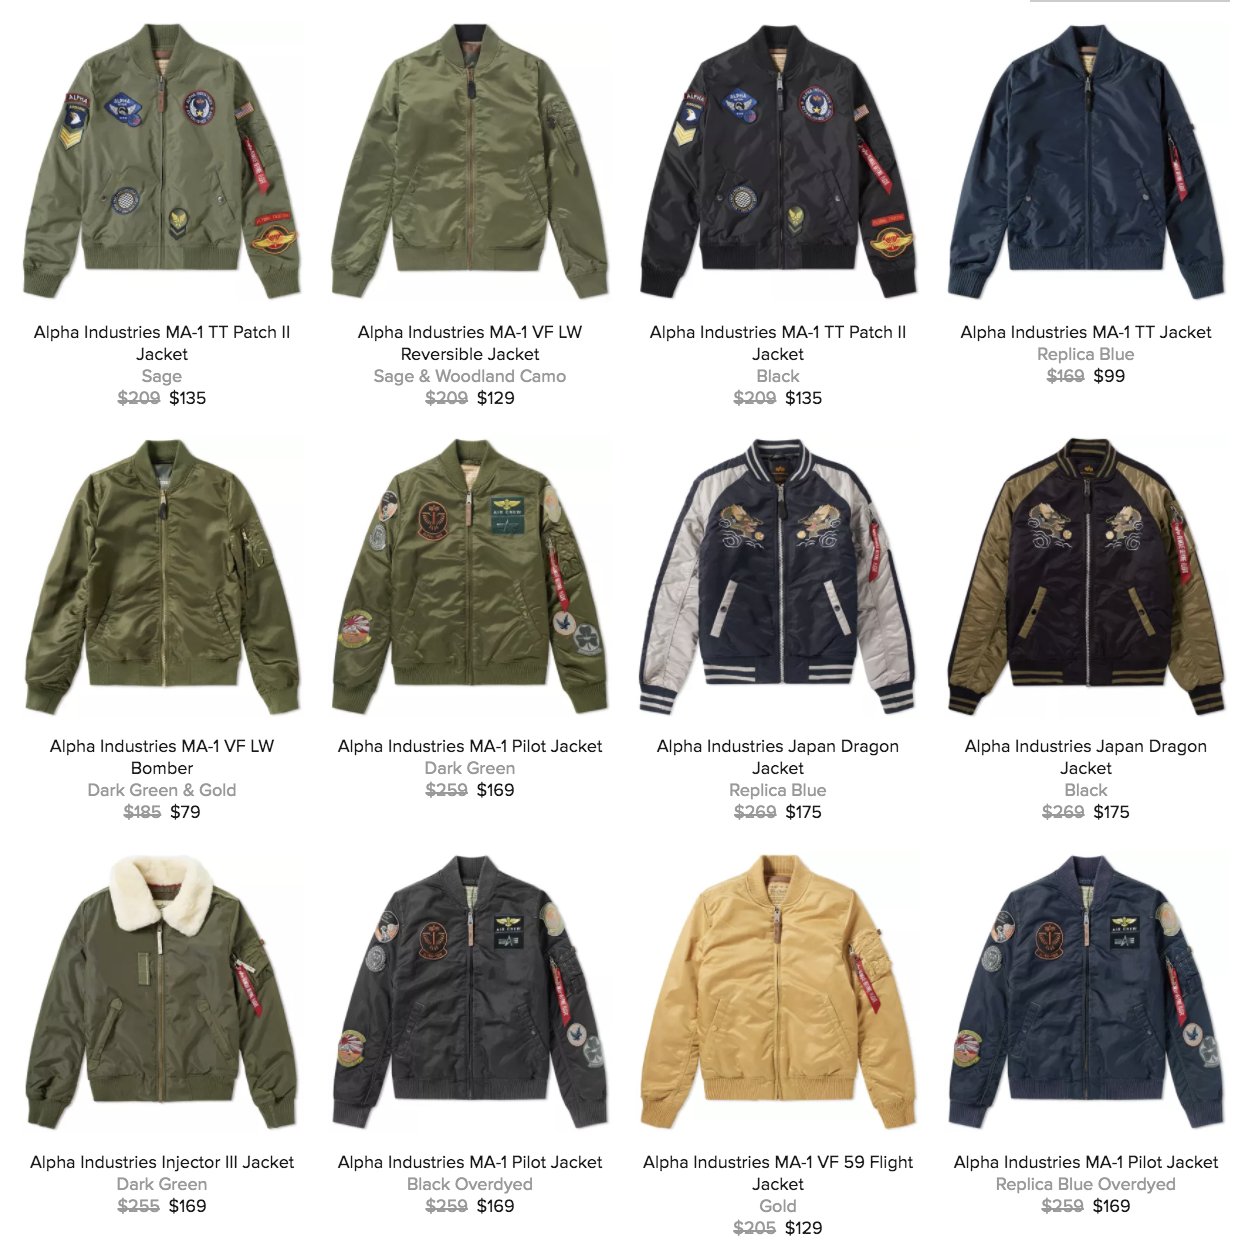 SOLELINKS on X: "💥 Huge discounts on Alpha Industries Jackets via End, no  code needed => https://t.co/SaE4rh1iOR https://t.co/Ml6Y3vV29j" / X